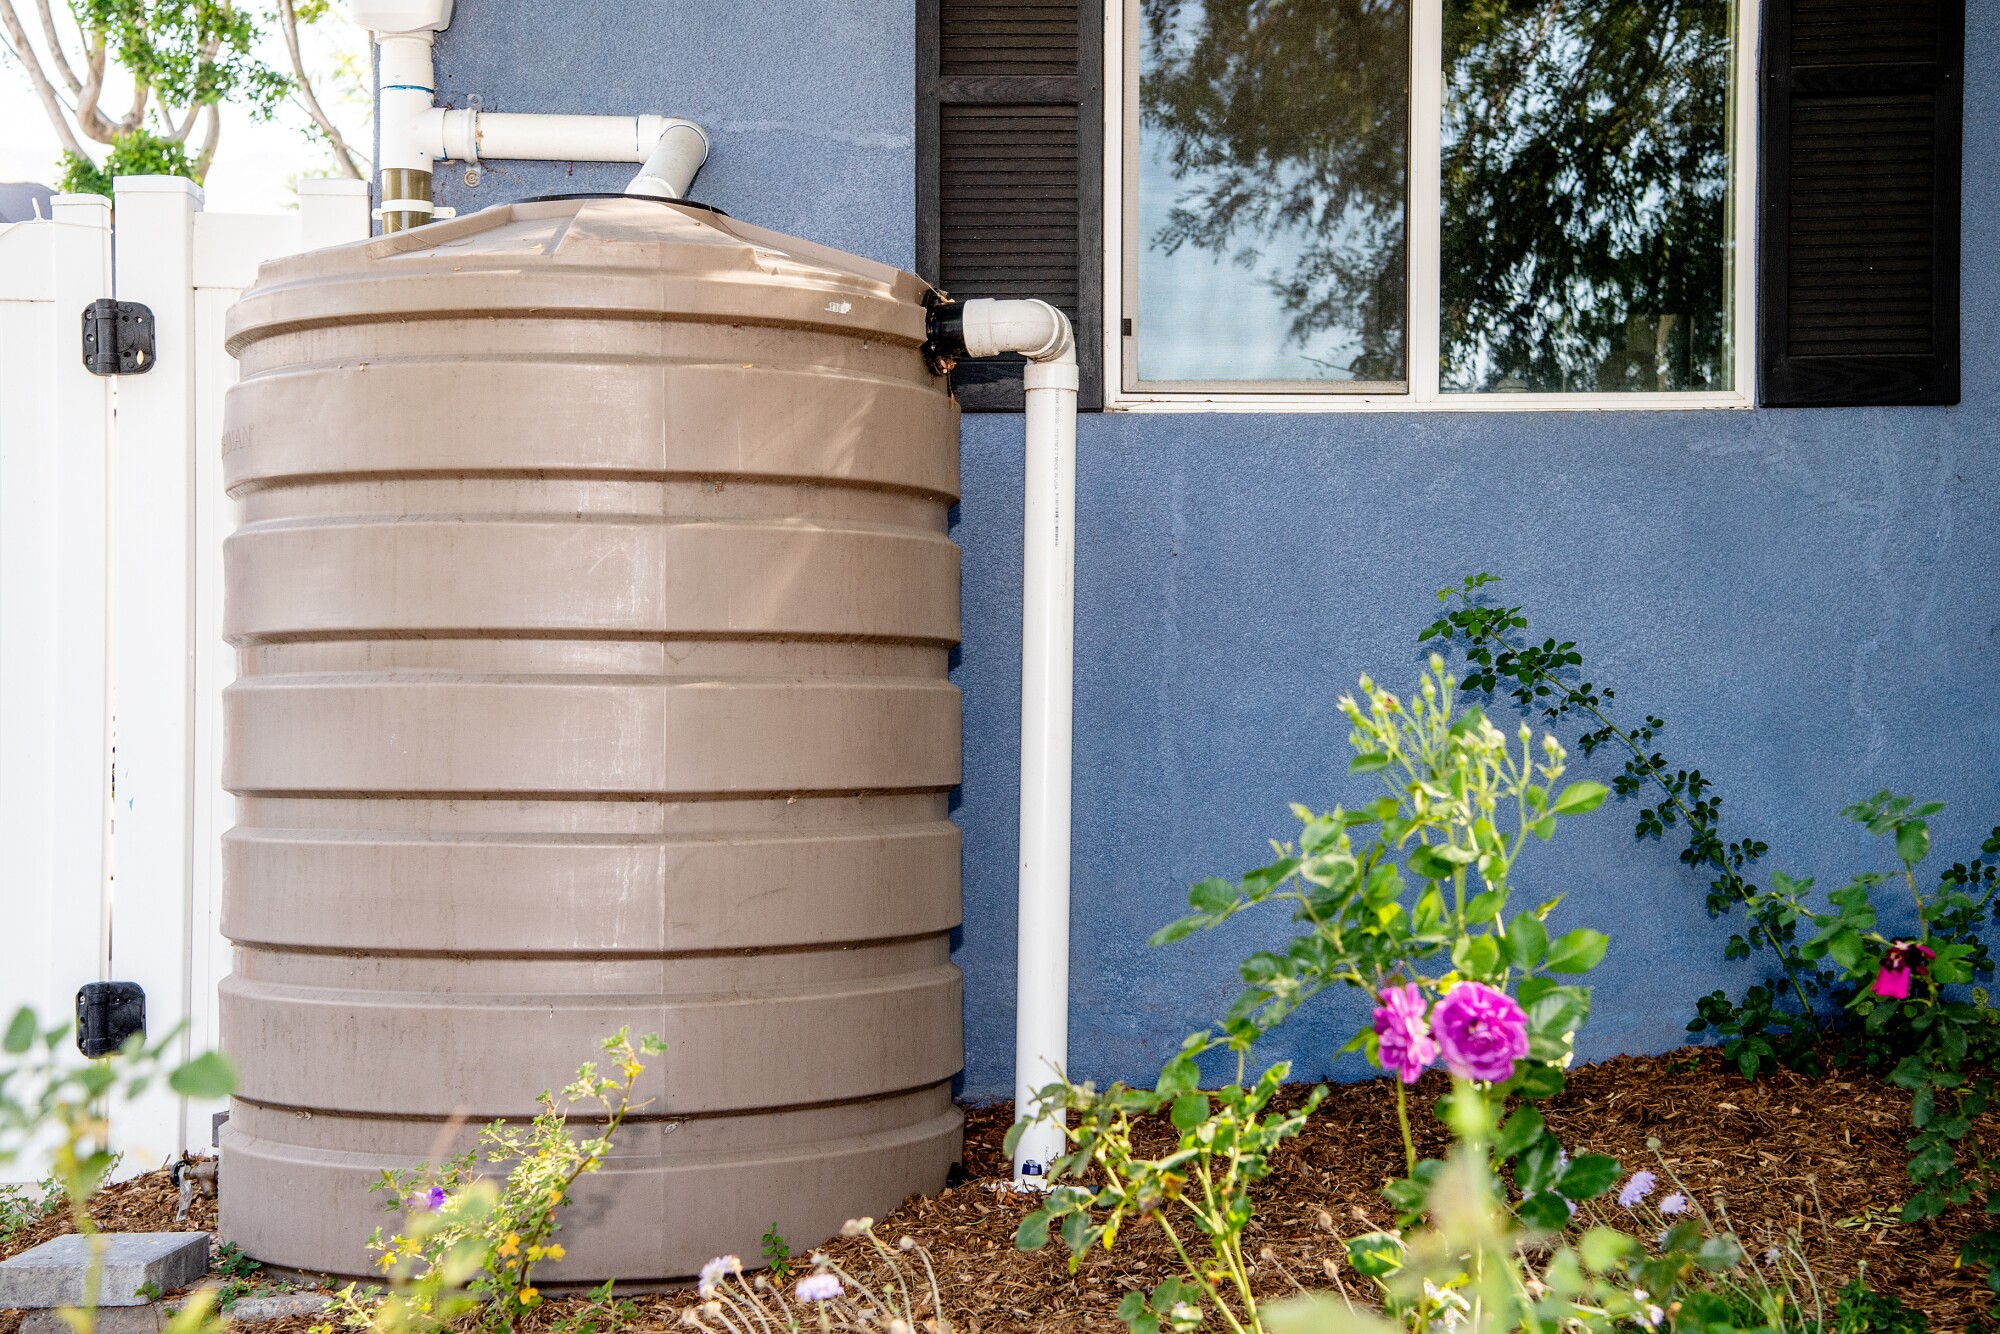 A rainwater barrel in front of the house 